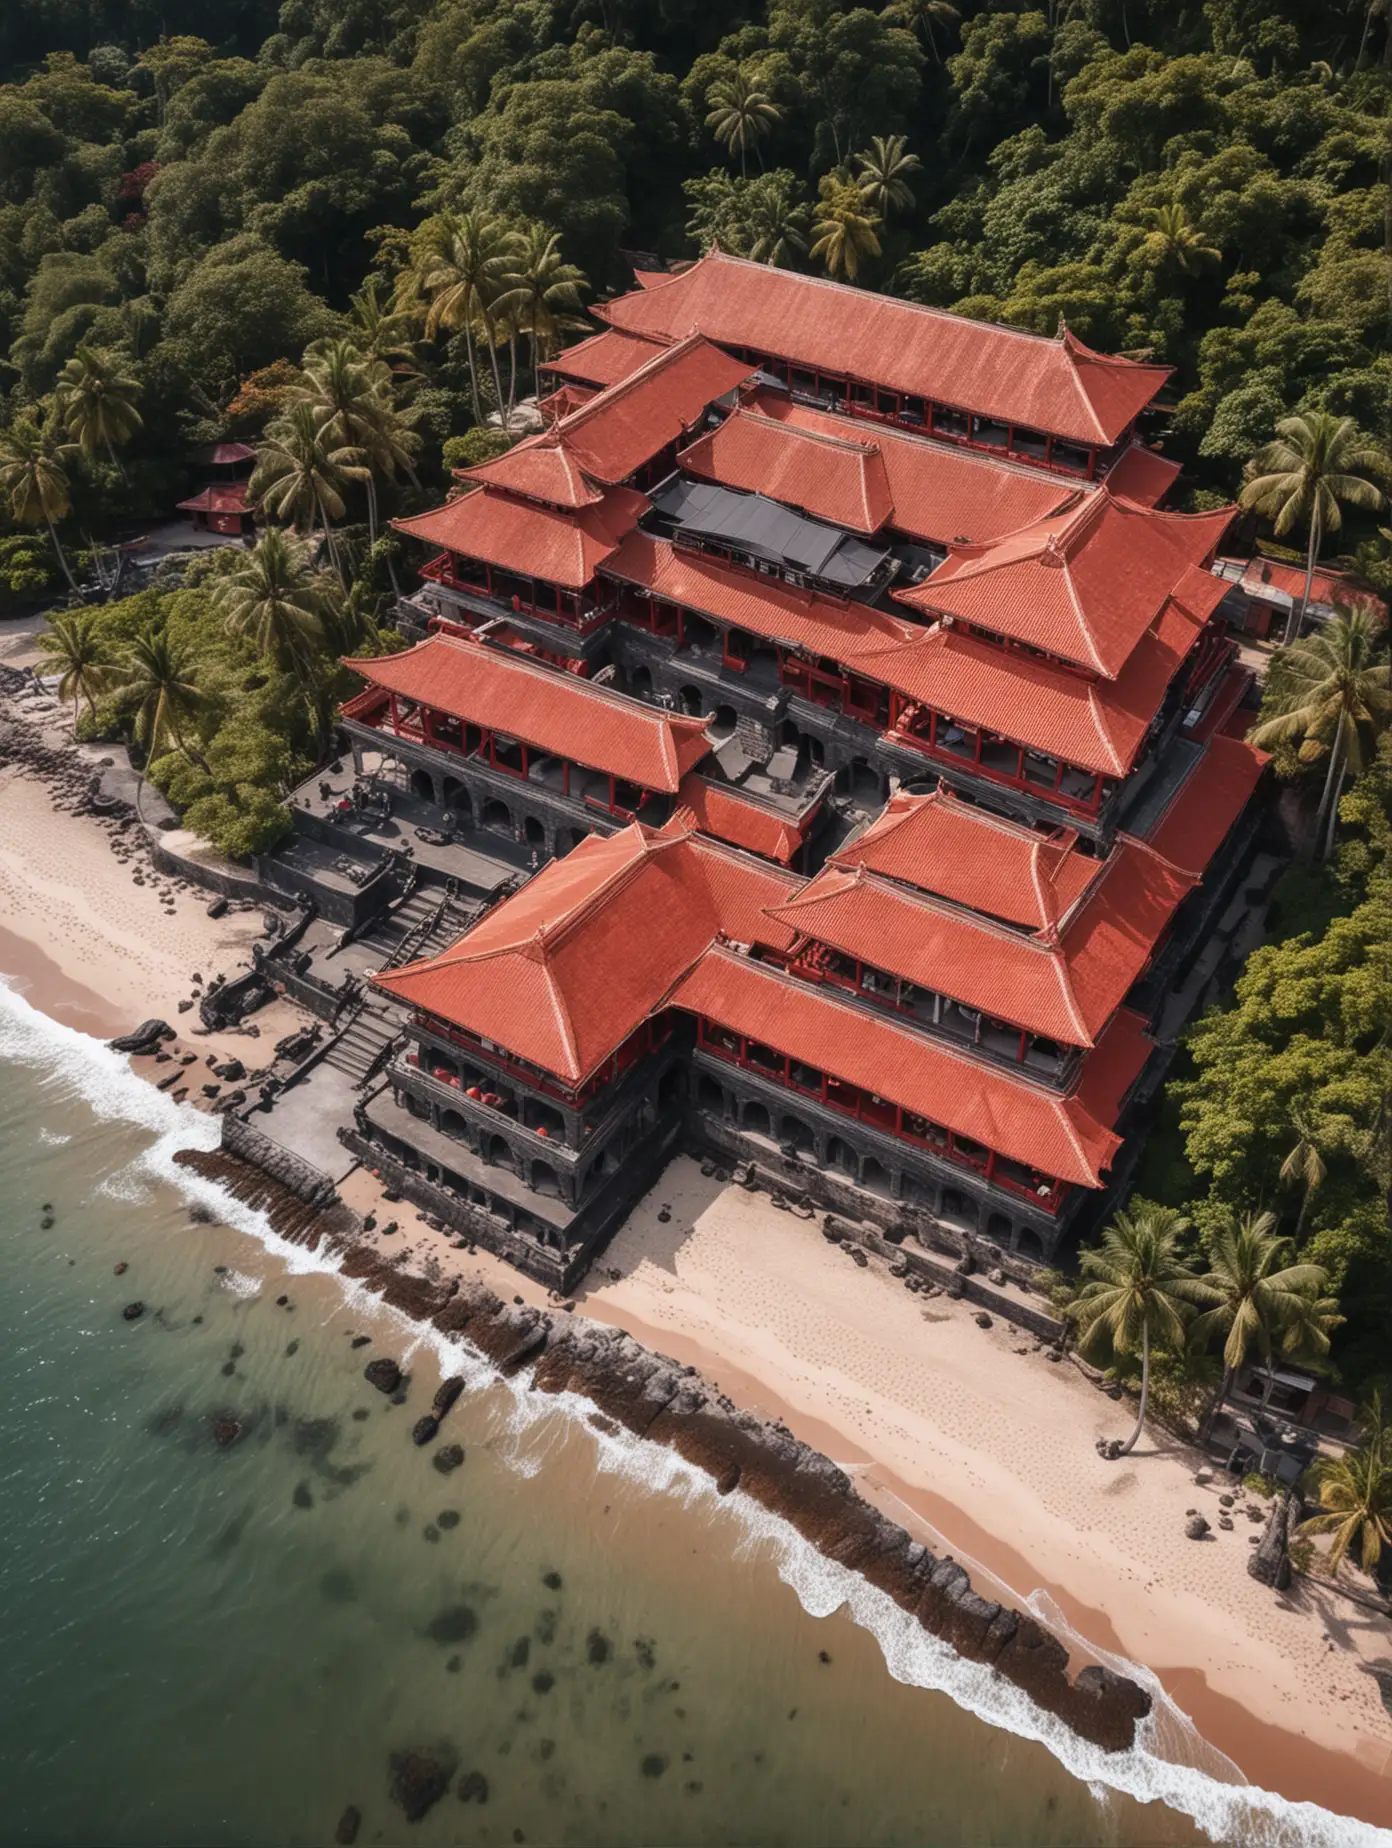 view of a large and spacious palace made of black and red Indonesian stone on the beach, surrounded by red stone walls with red-roofed houses. highlight from above